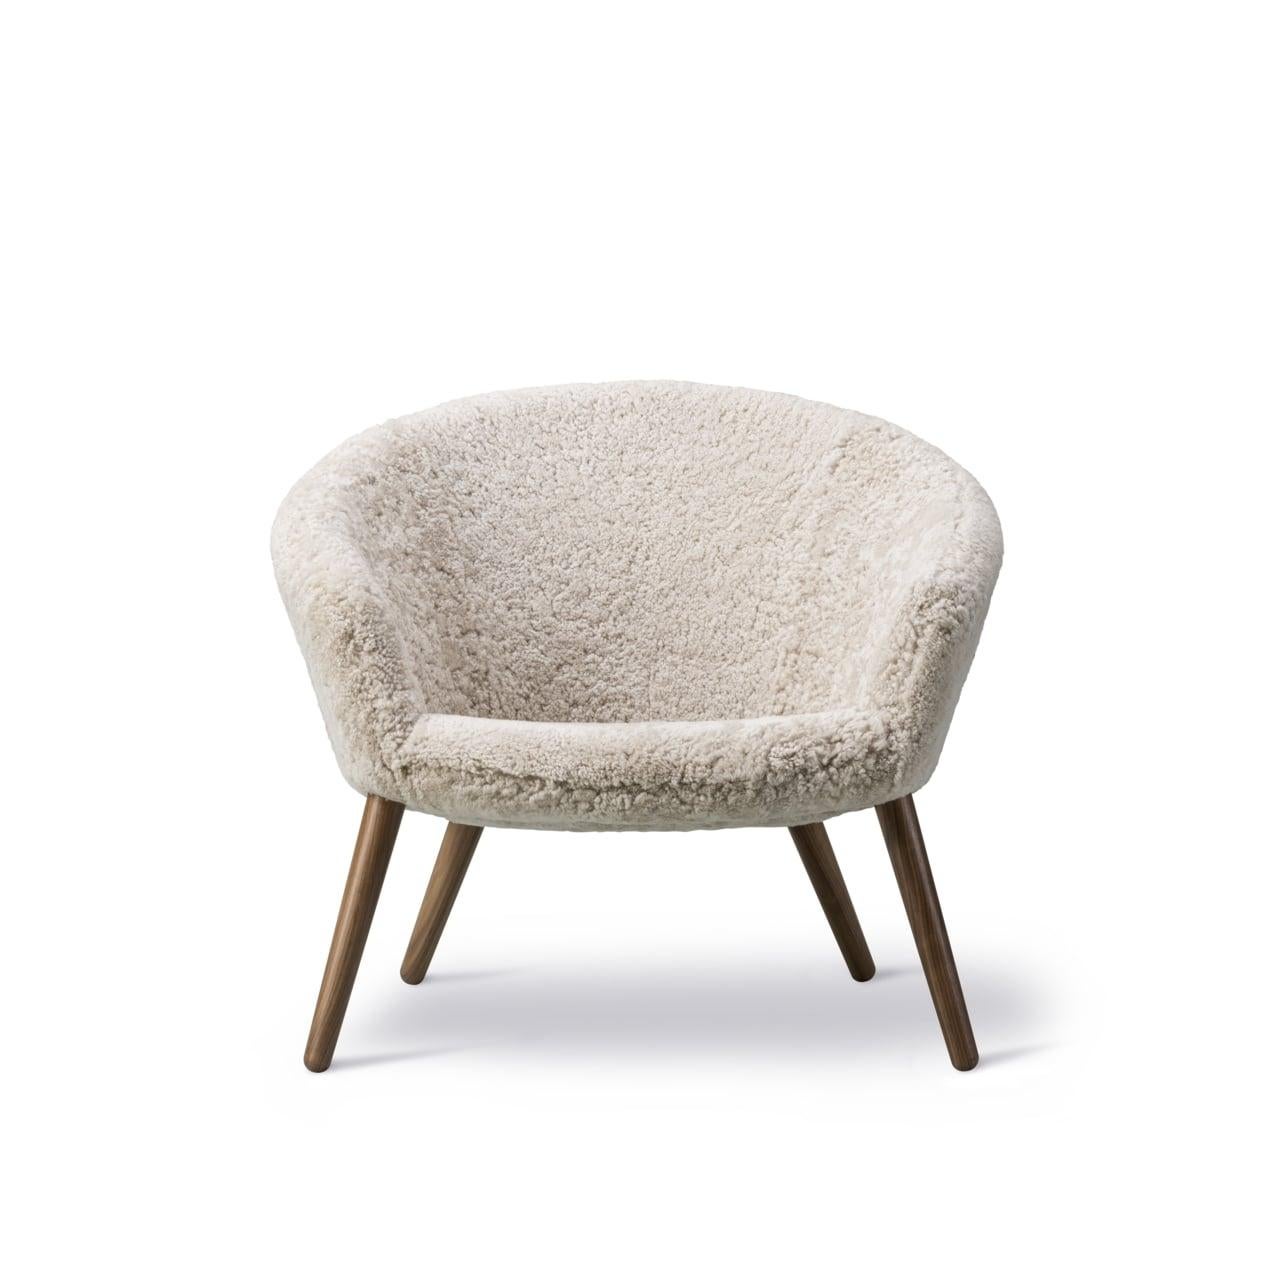 Scandinavian Modern Ditzel Lounge Chair in Moonlight Sheepskin / Lacquered Walnut for Fredericia For Sale